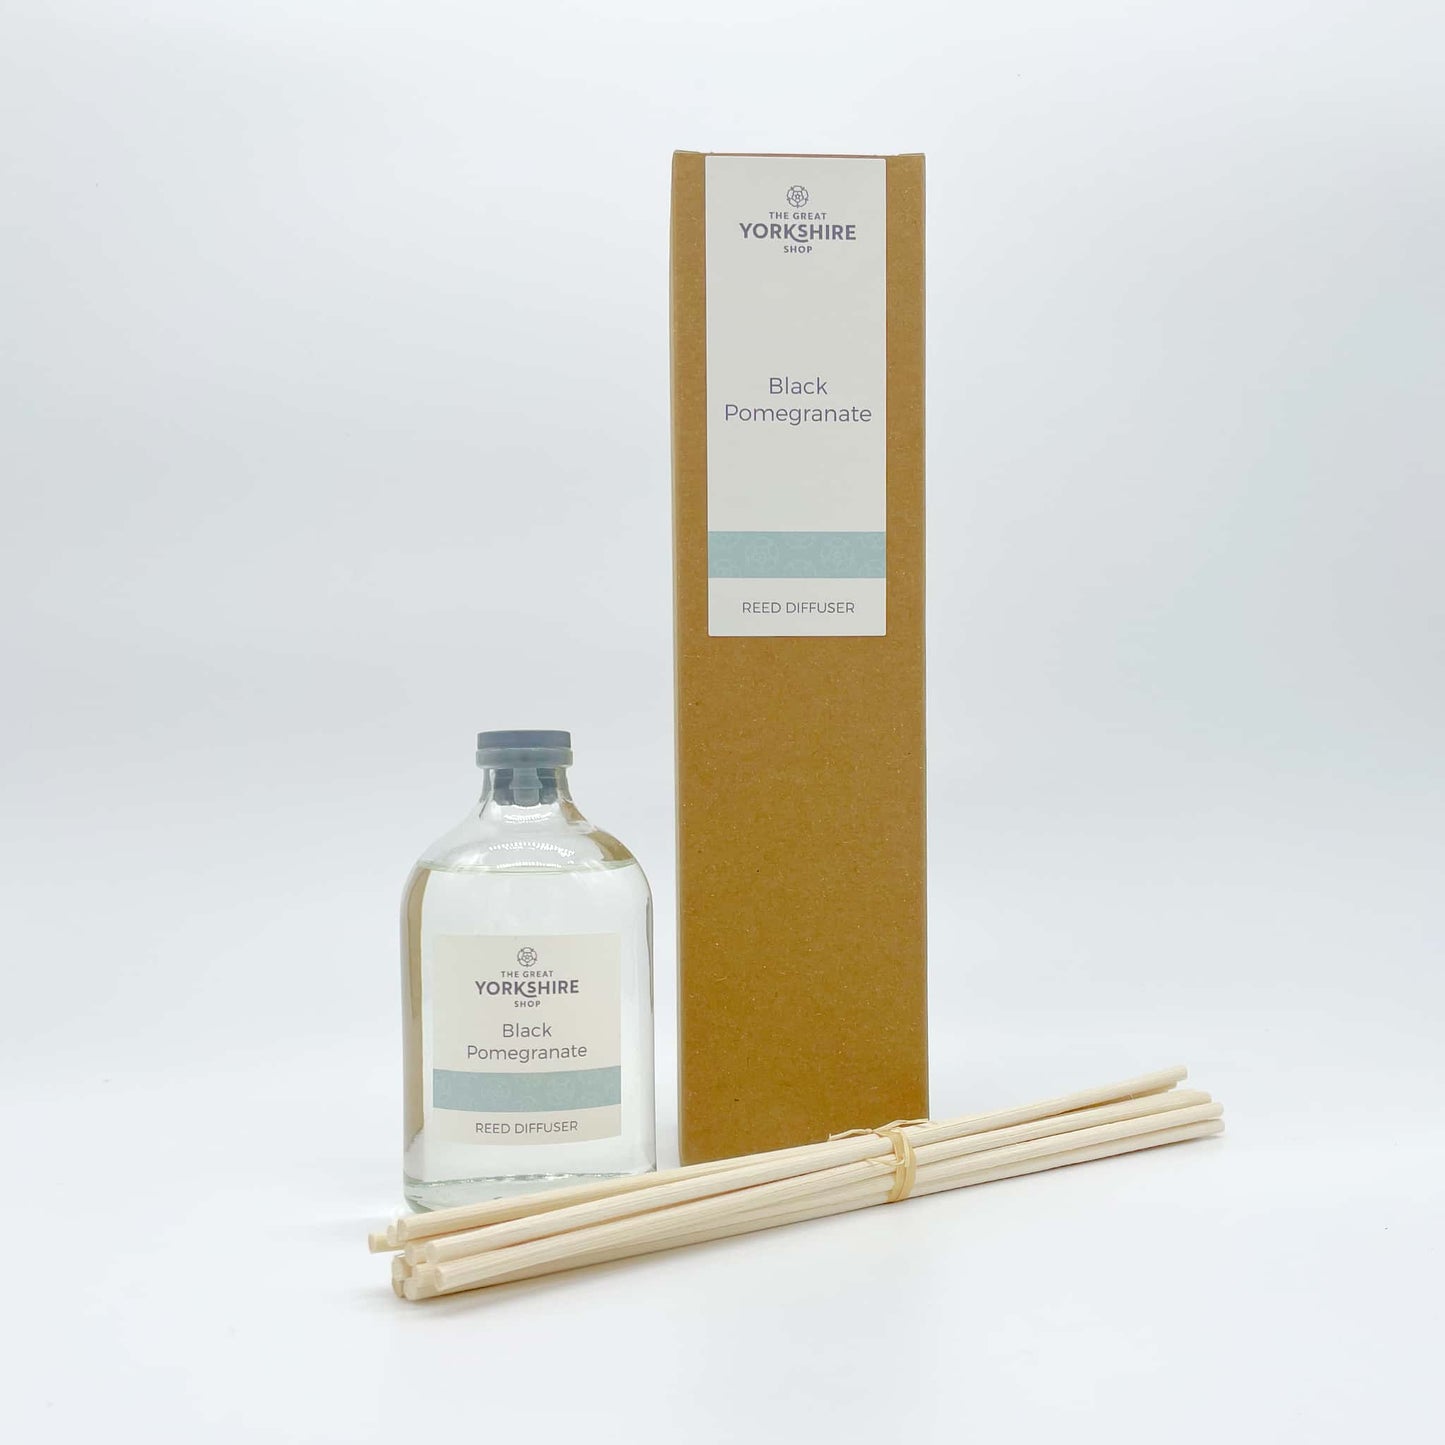 Black Pomegranate Reed Diffuser - The Great Yorkshire Shop